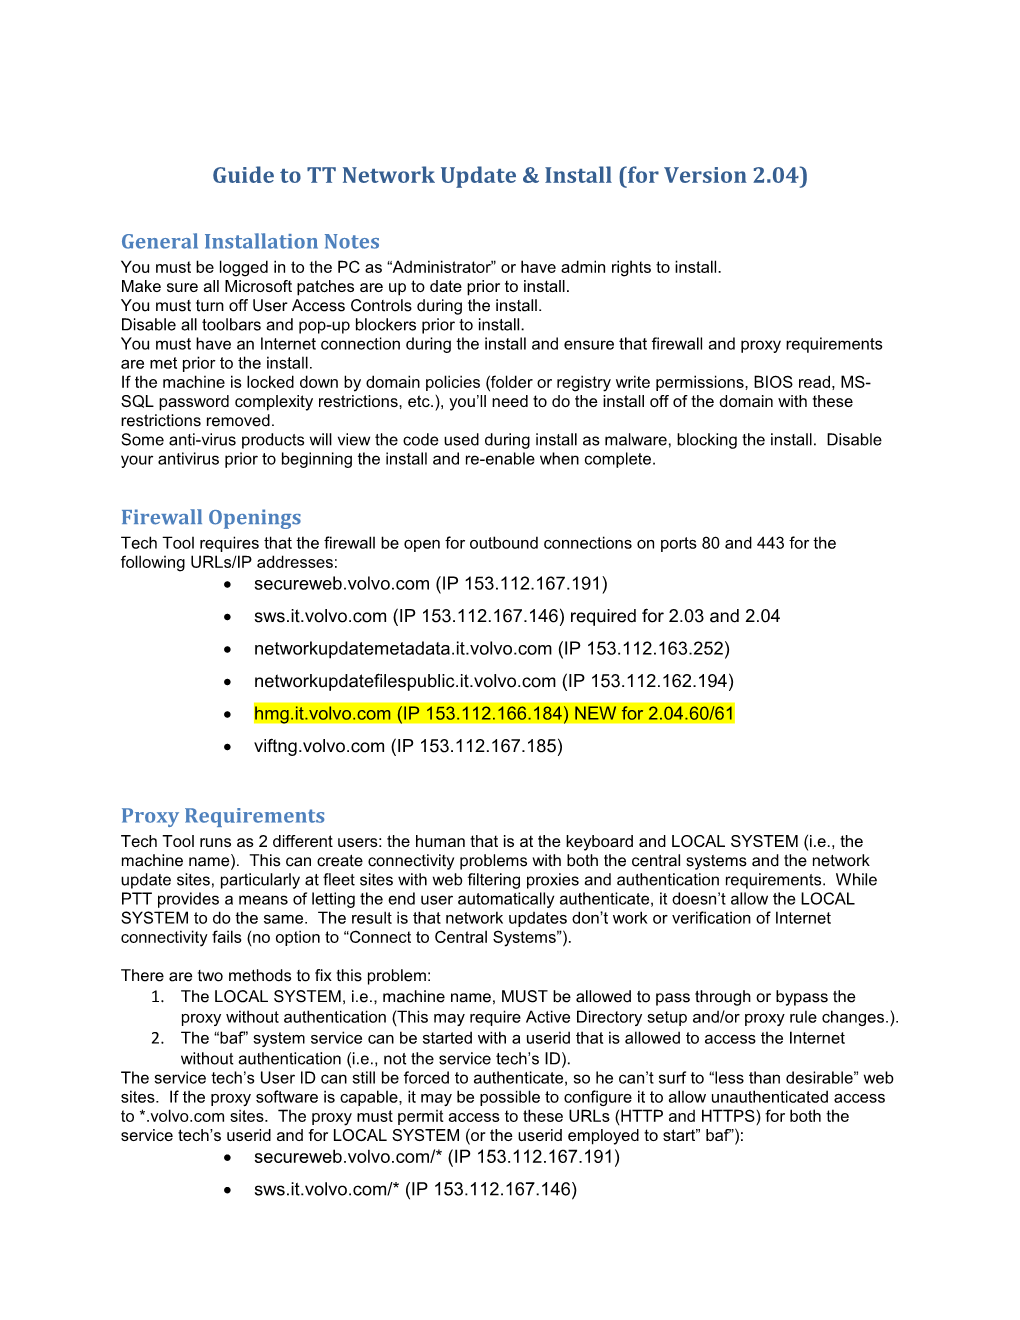 Guide to TT Network Update & Install (For Version 2.04)